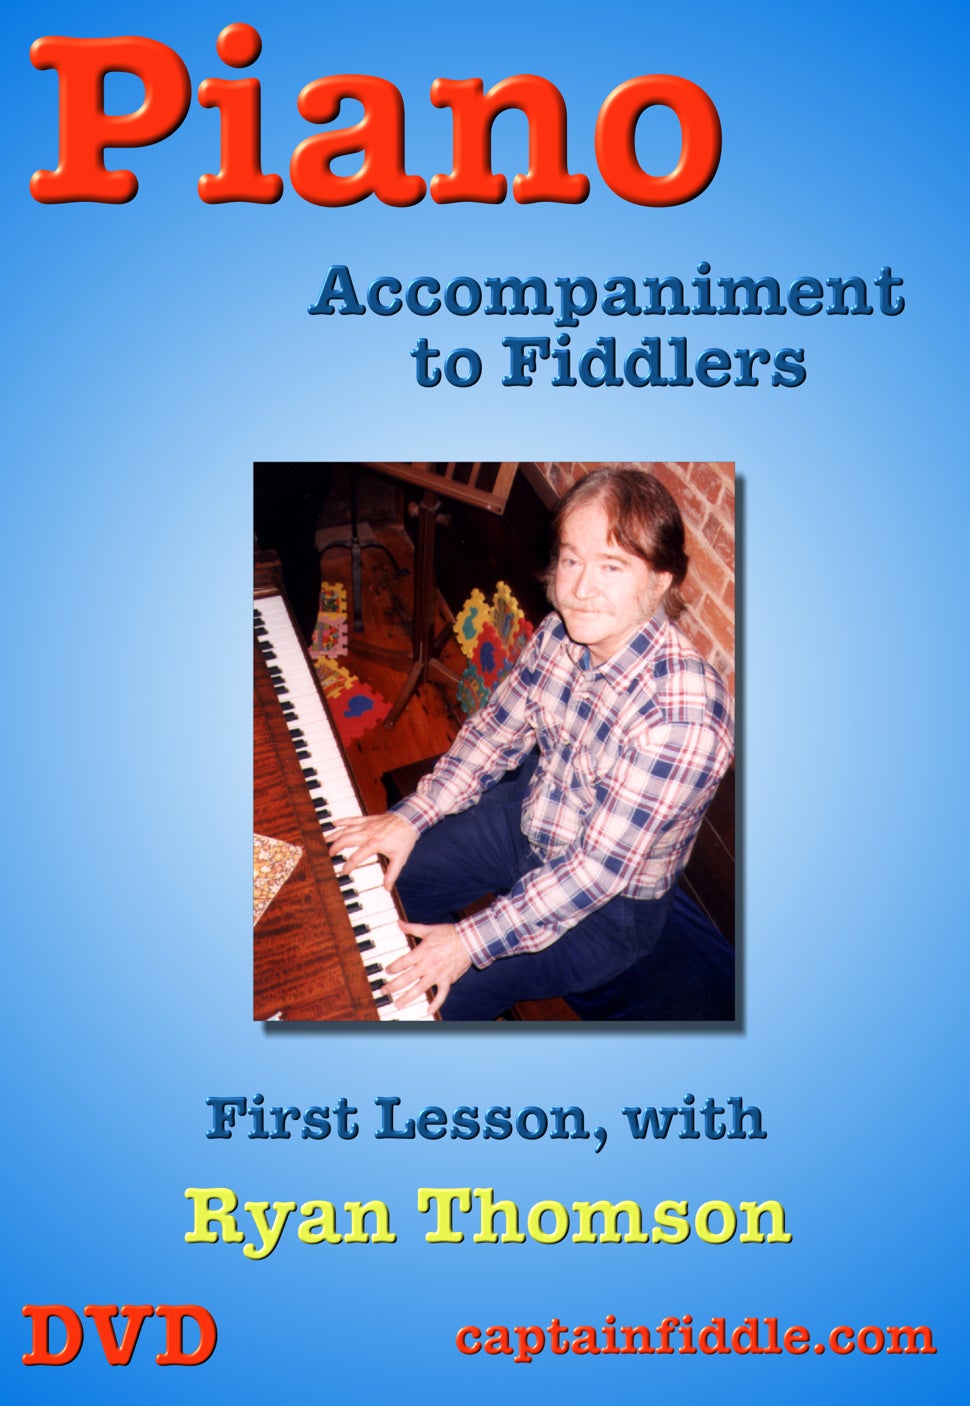 Piano Accompaniment to Fiddlers with Ryan Thomson, video DVD box cover